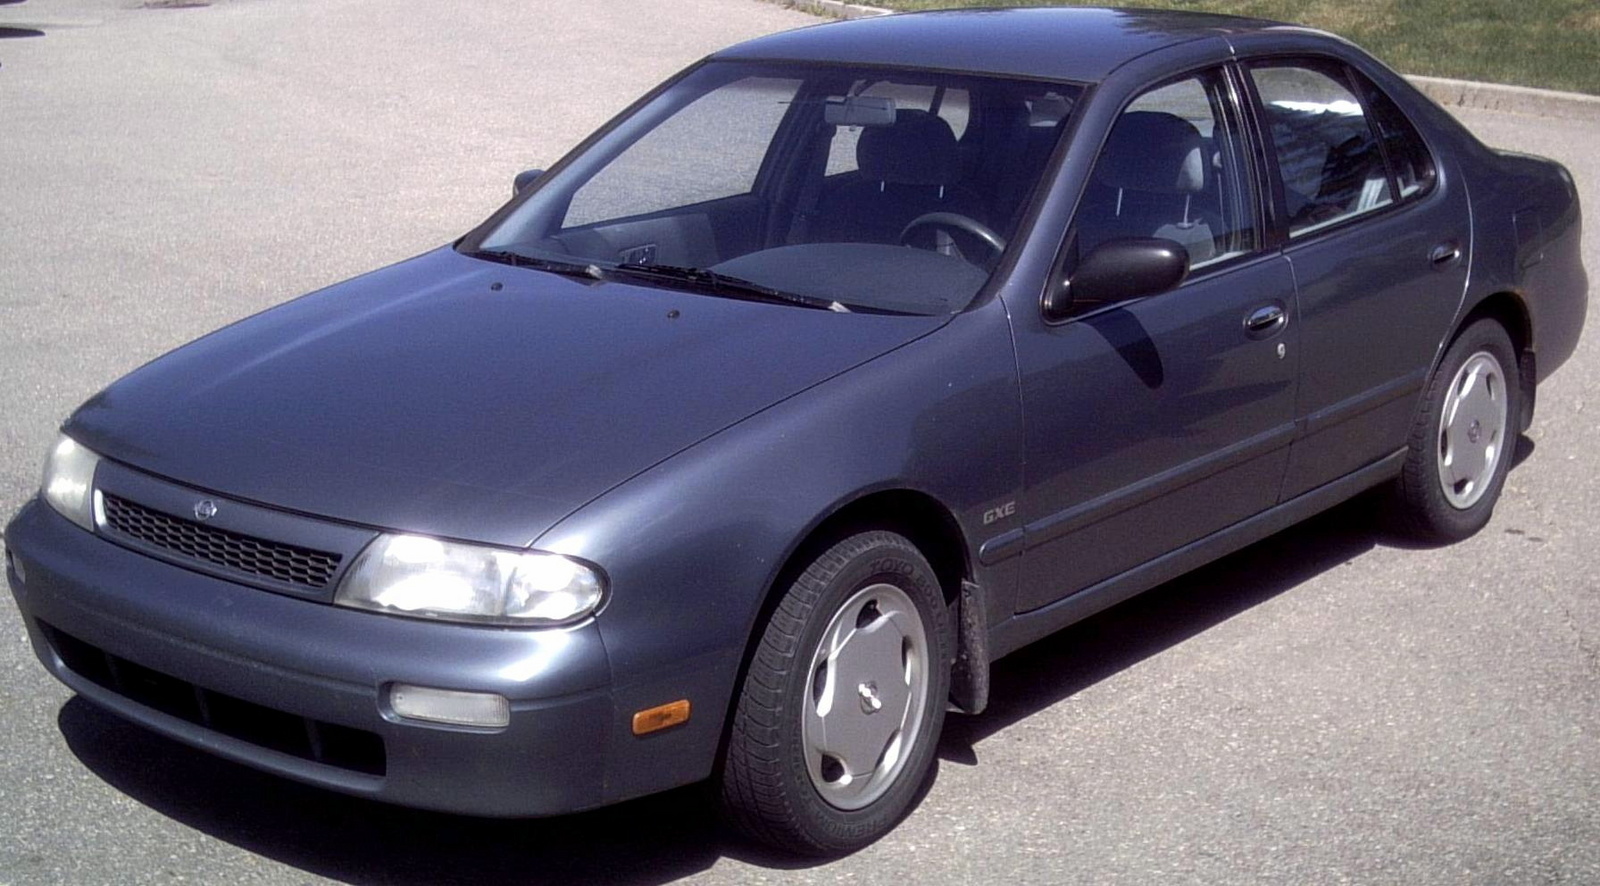 1994 Nissan altima gxe reviews #5